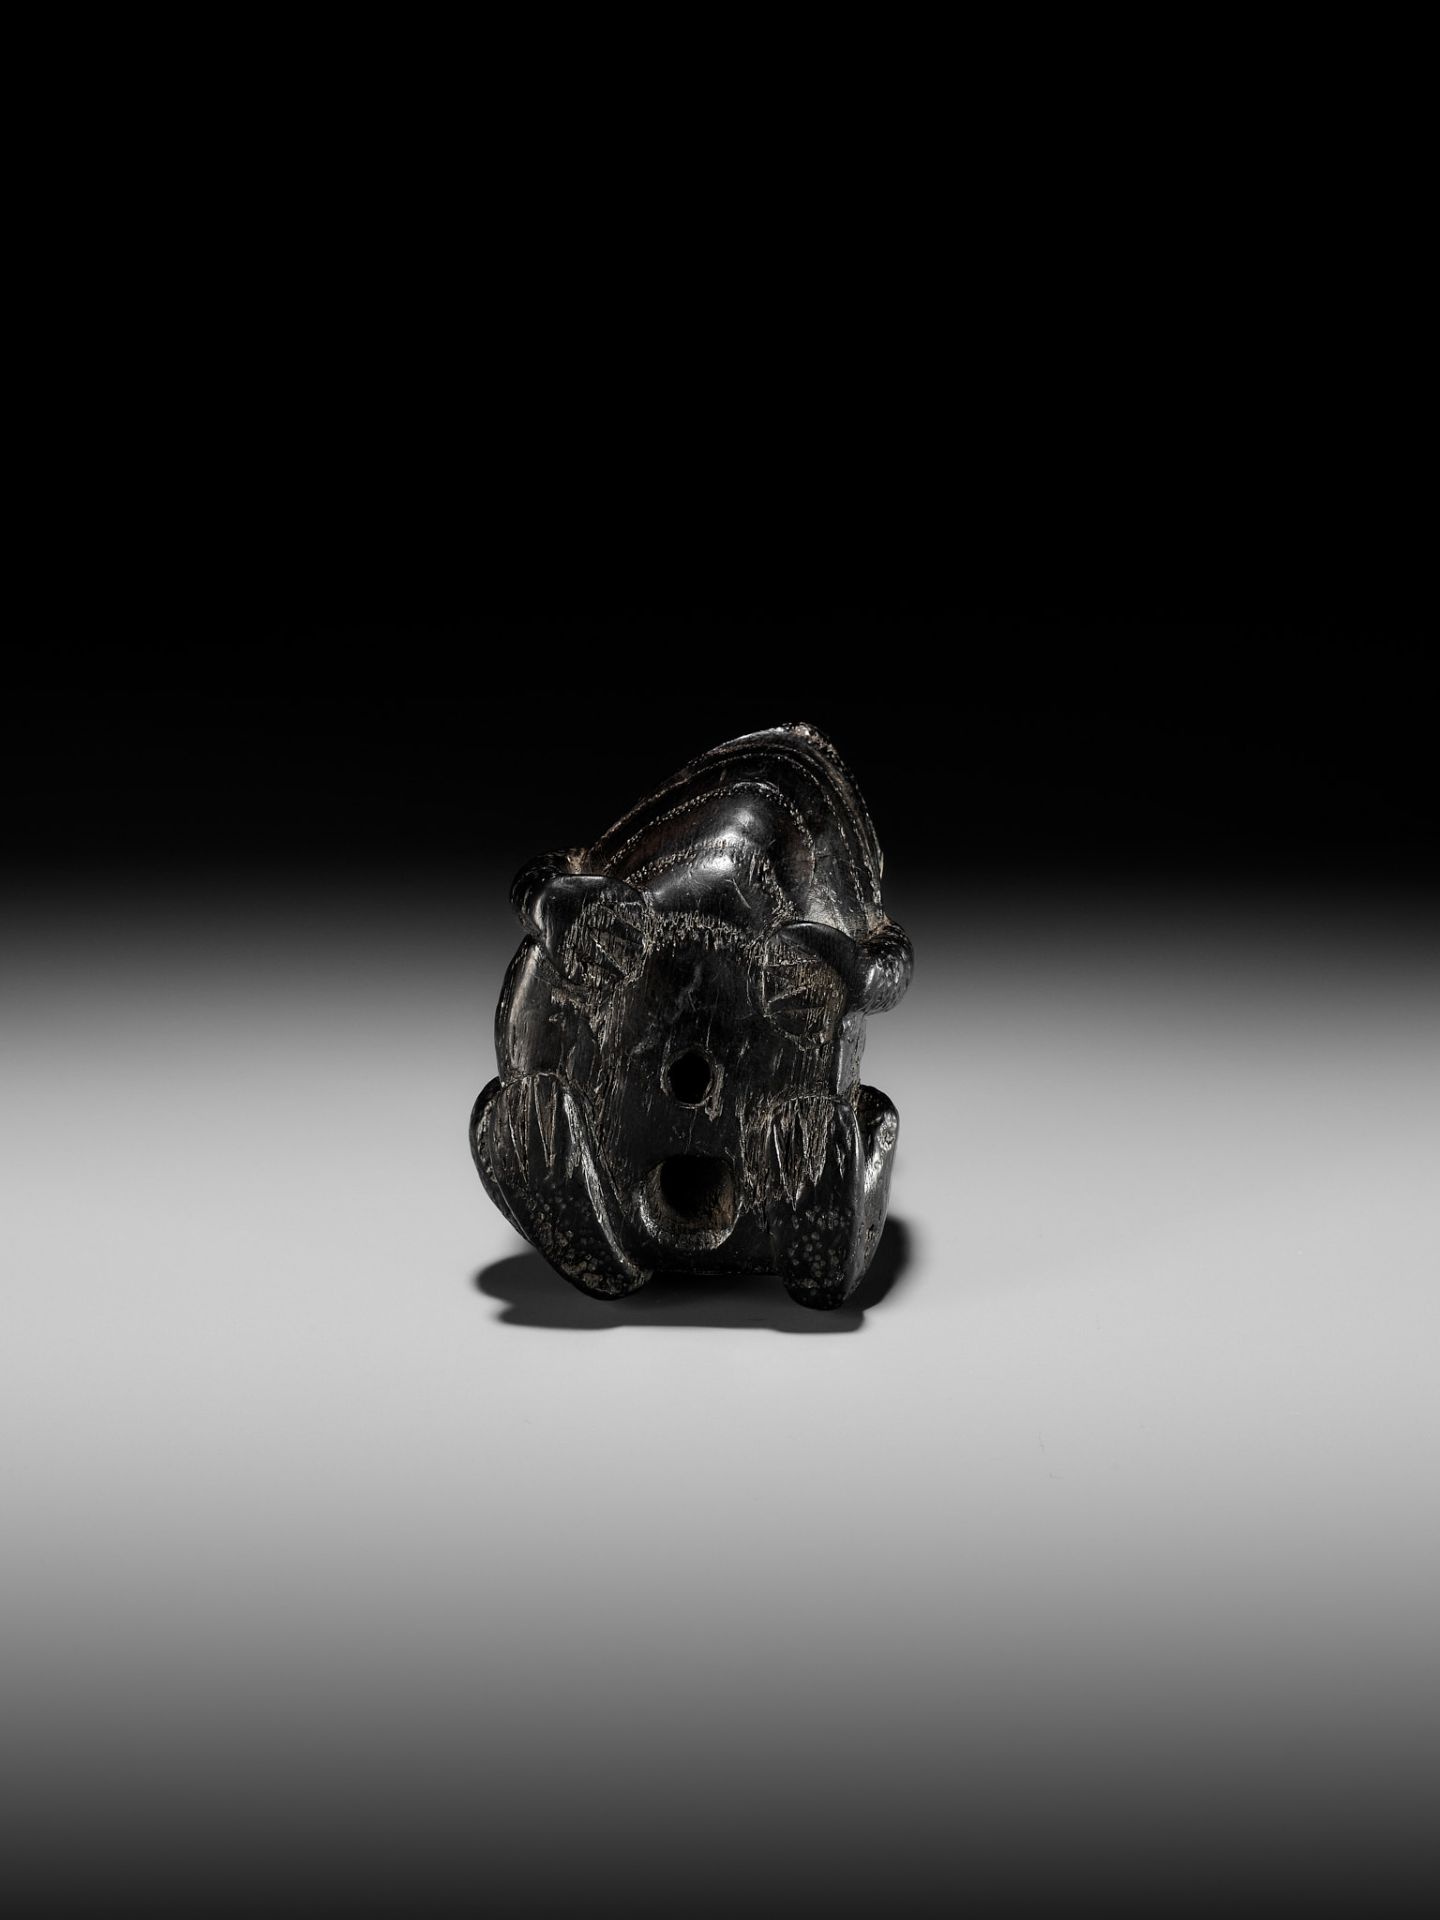 AN OLD AND RUSTIC EBONY WOOD NETSUKE OF A TOAD - Image 9 of 9